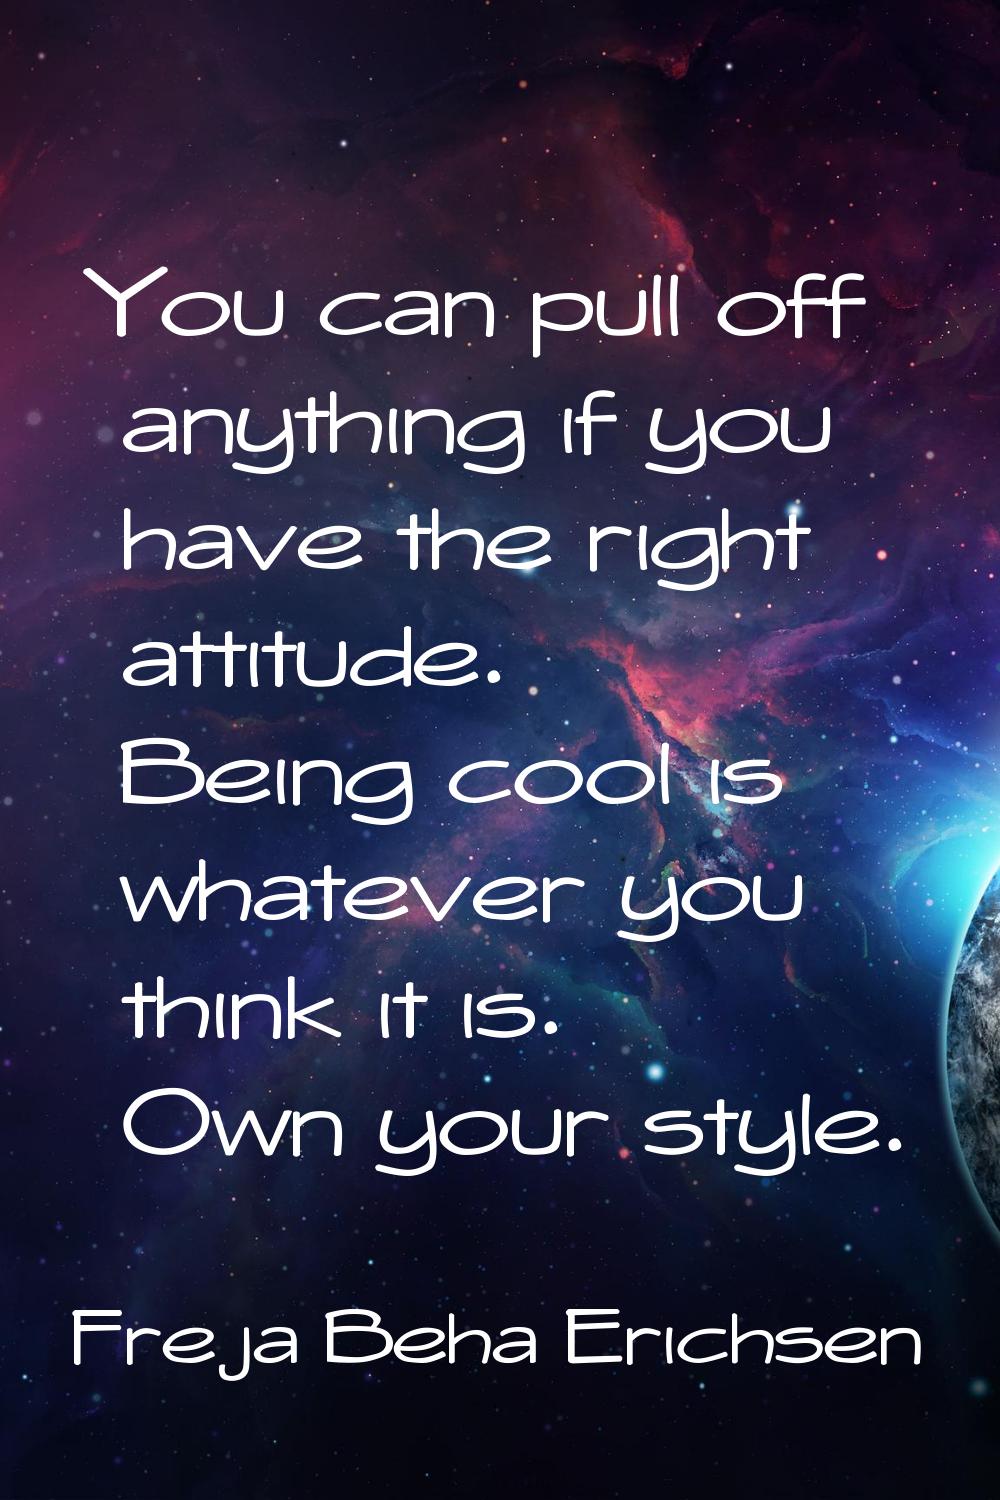 You can pull off anything if you have the right attitude. Being cool is whatever you think it is. O